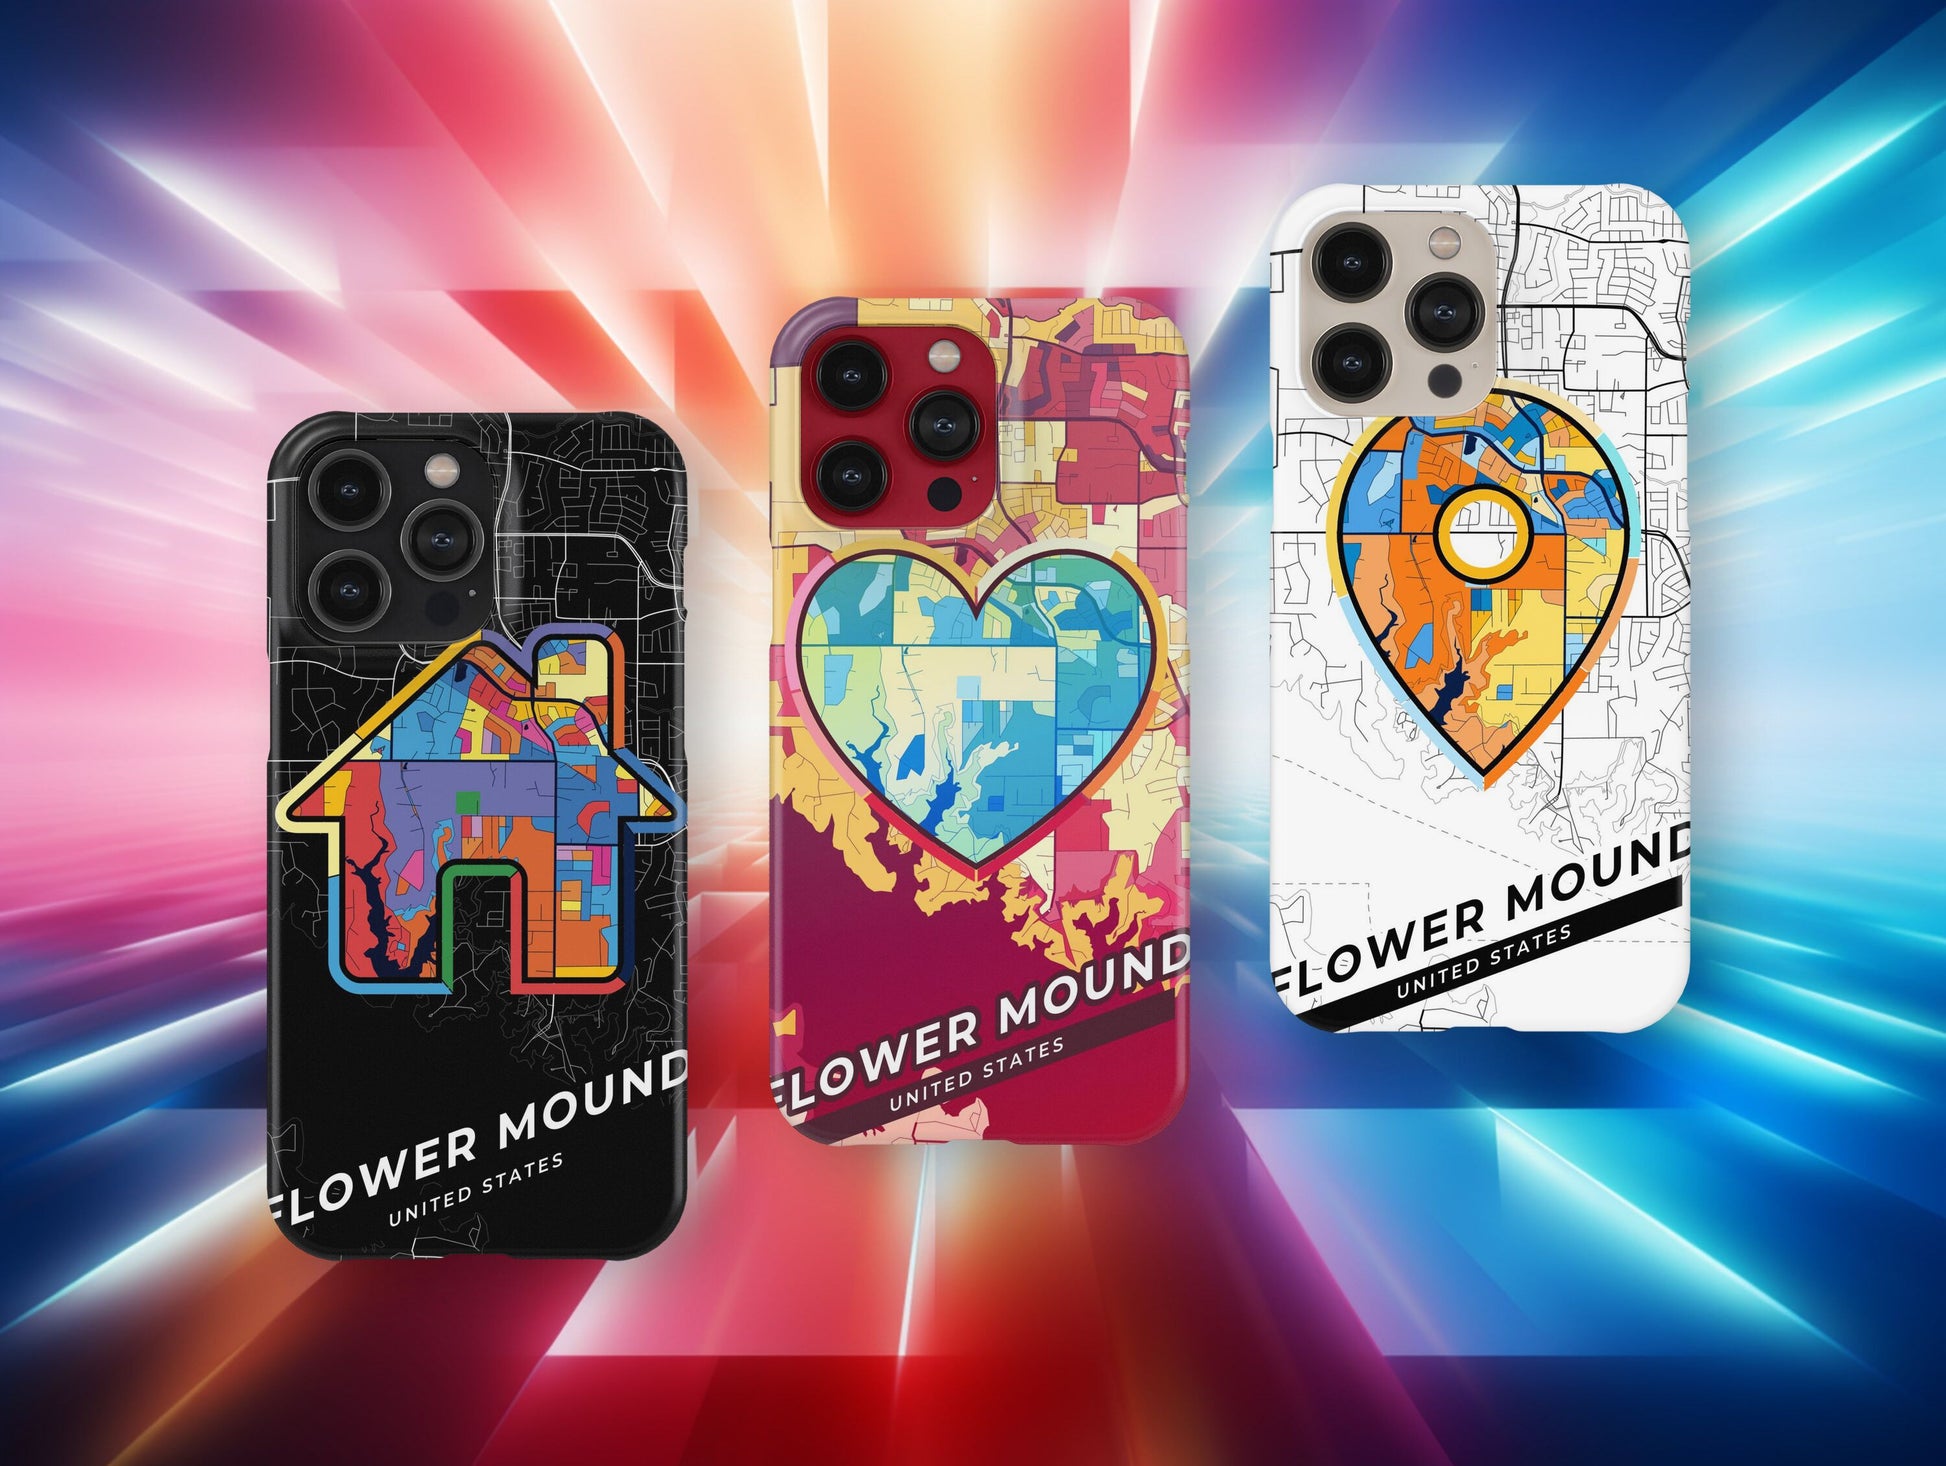 Flower Mound Texas slim phone case with colorful icon. Birthday, wedding or housewarming gift. Couple match cases.